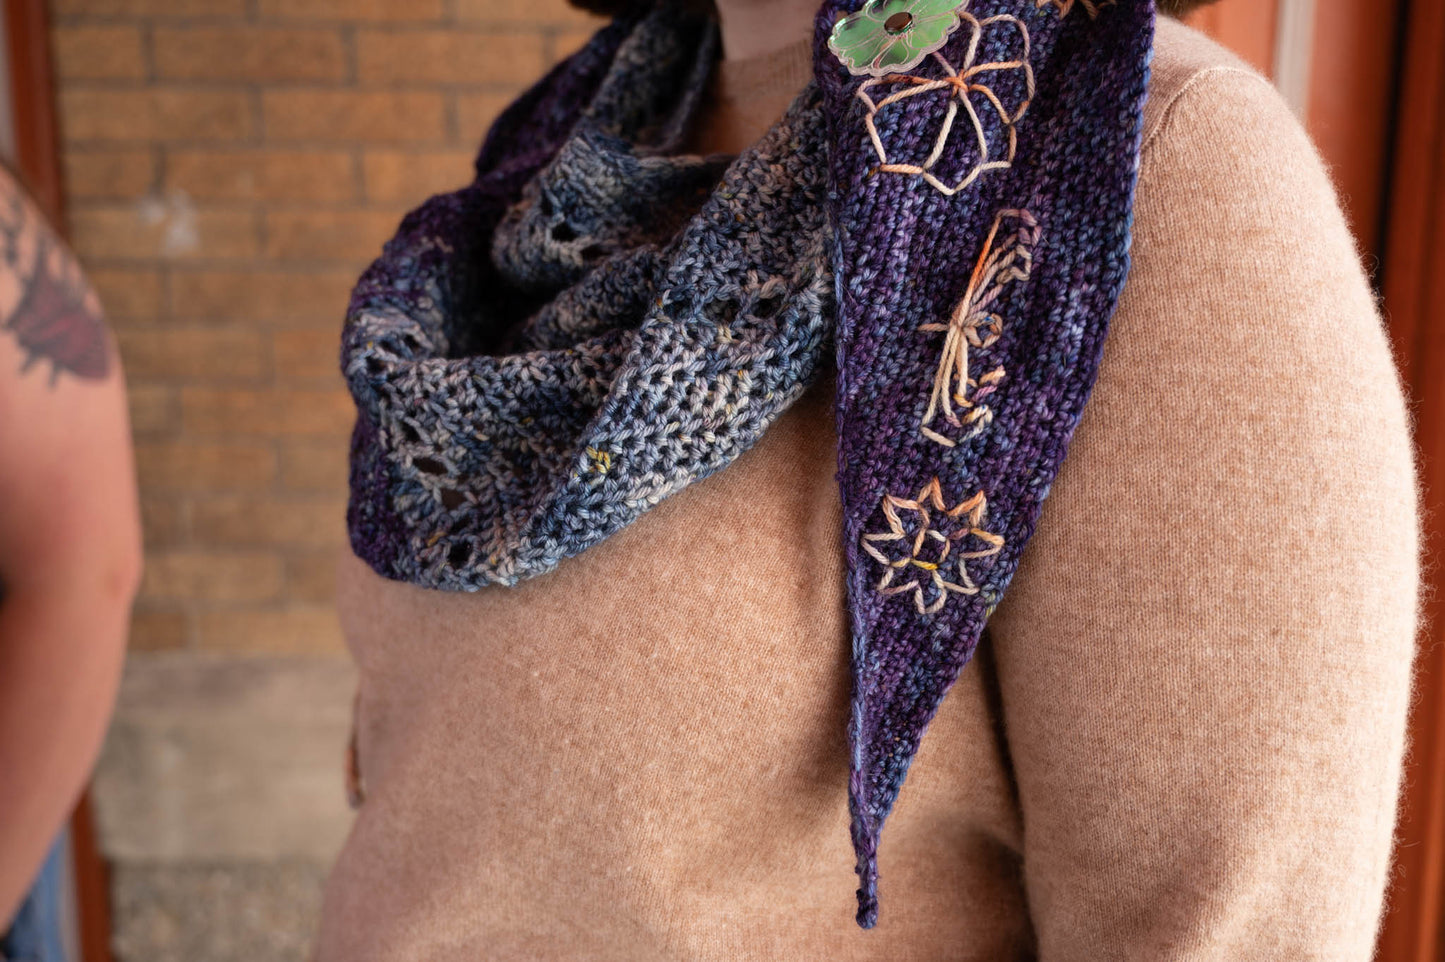 Cat, a white woman, wears a blue and purple crochet shawl wrapped over a tan sweater and fastened with a floral shawl pin.